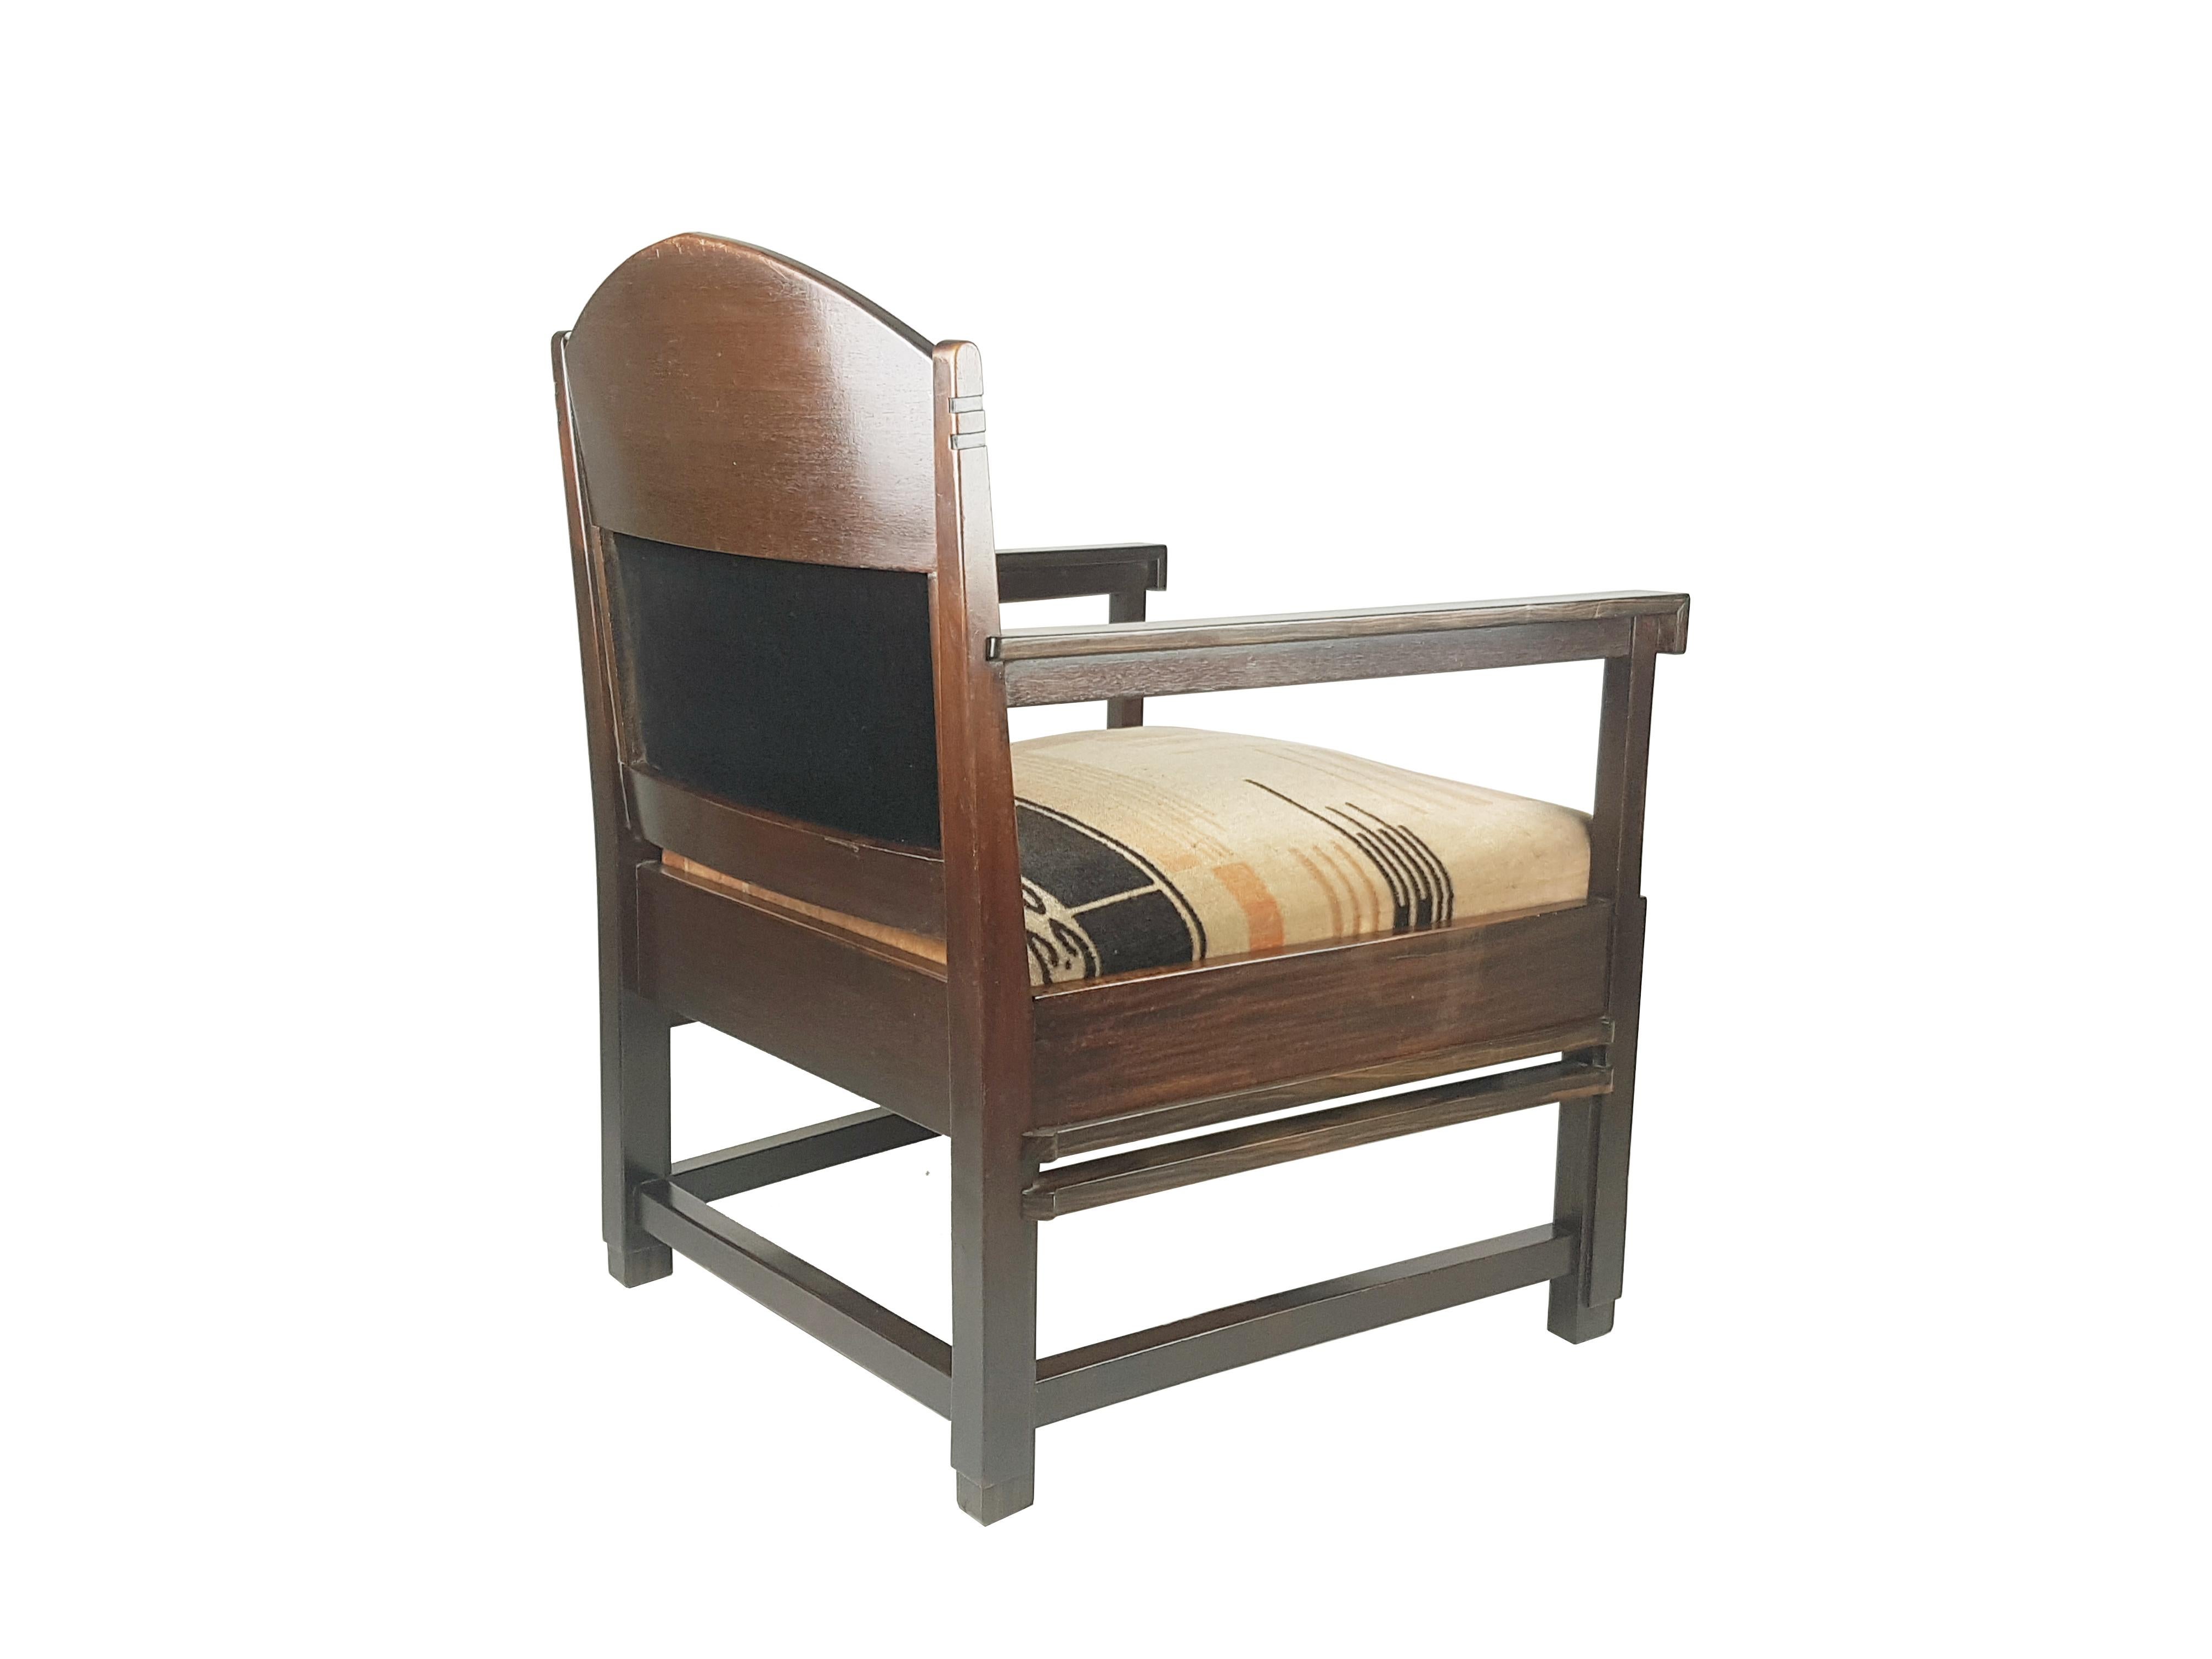 Rare Dutch Velvet & Wood '20s Armchair Attr. to C. Bartels from Amsterdam School For Sale 2